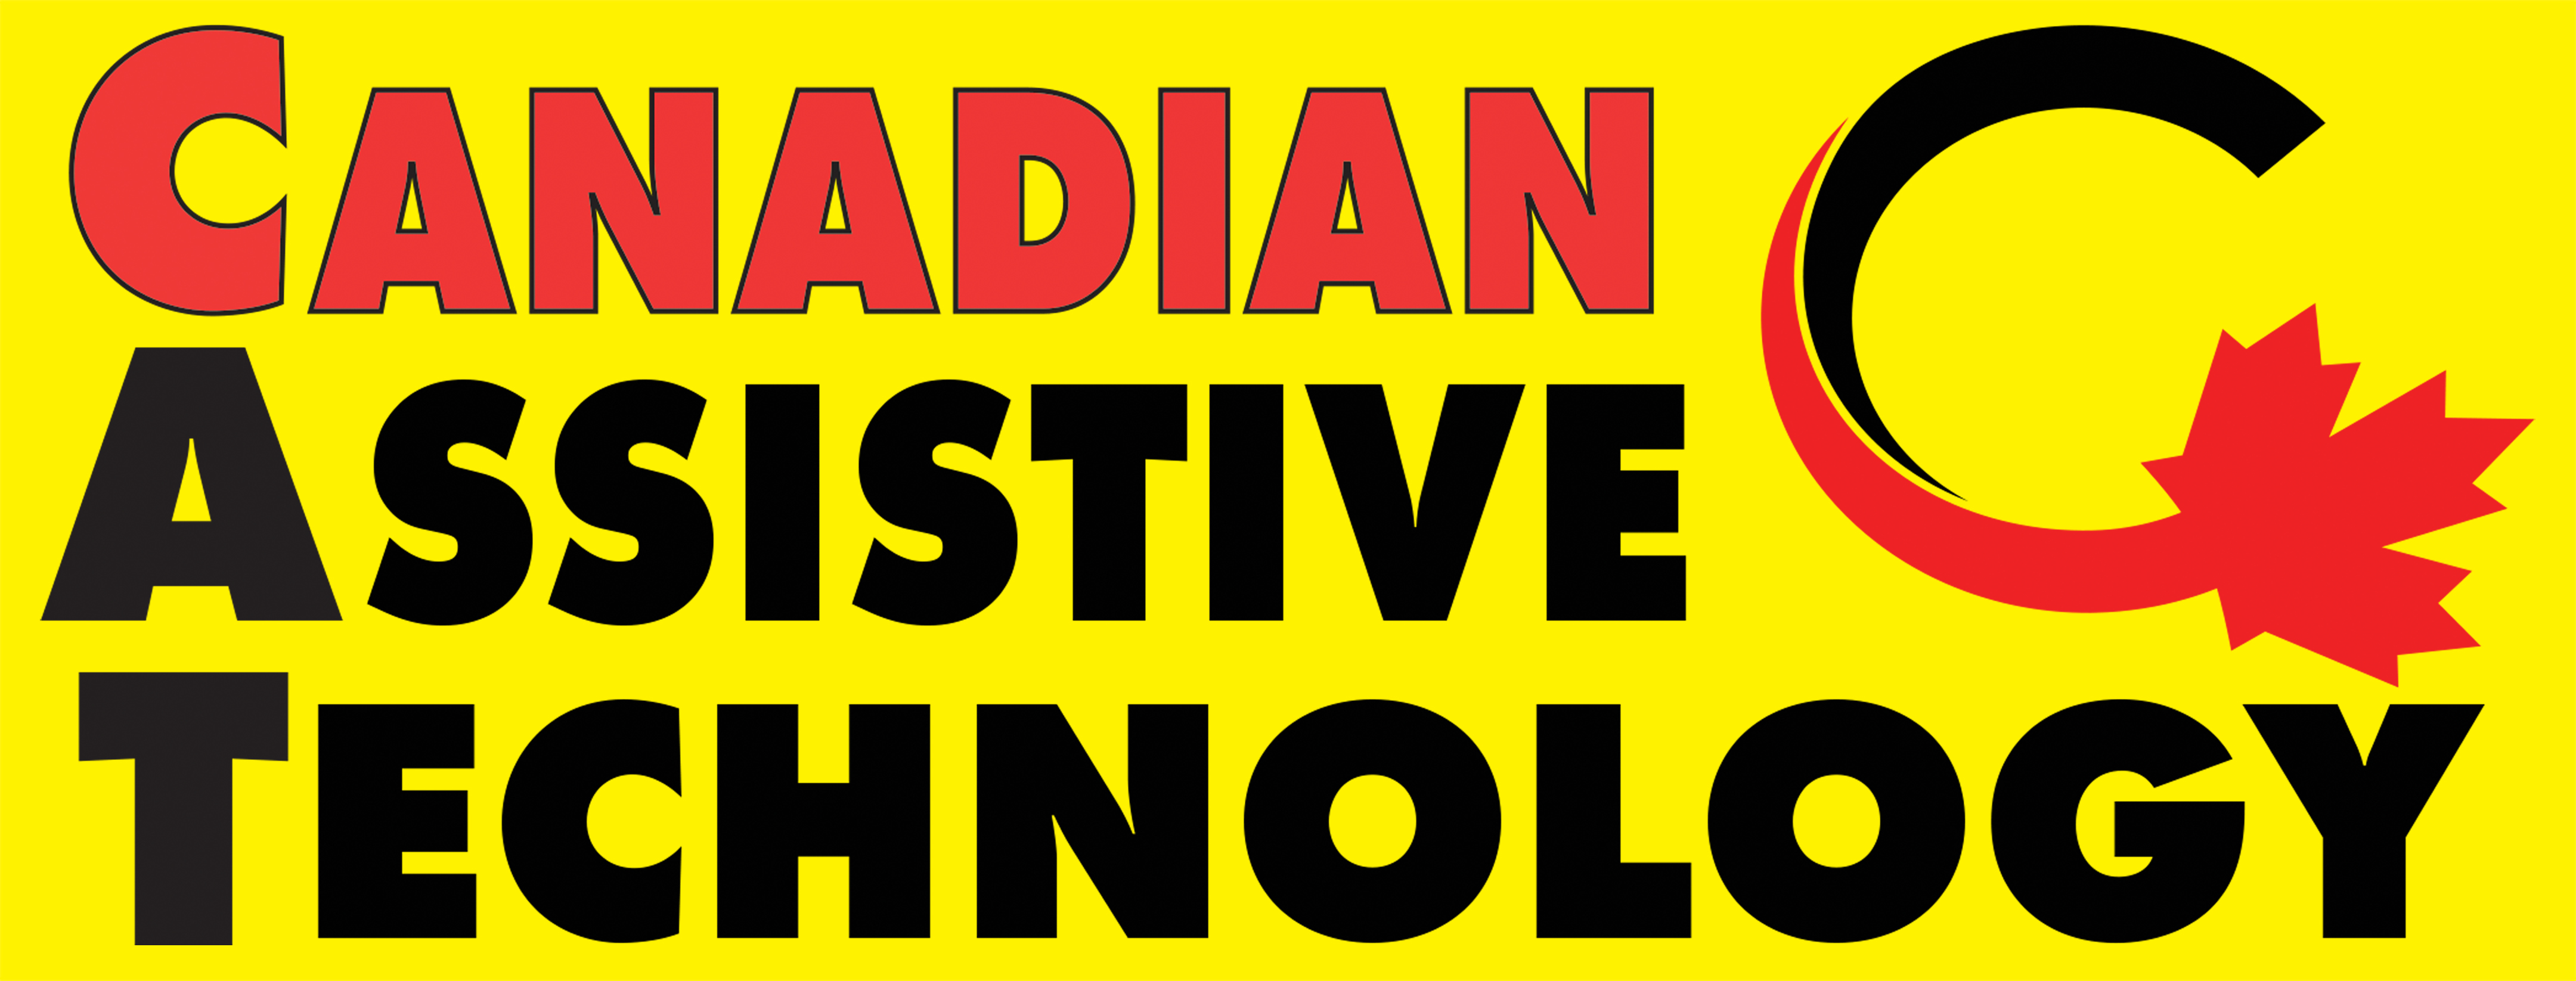 Canadian Assistive Technology logo. Yellow background with red (Canadian) and black (Assistive Technology) text. In the right corner is a black and red letter C that ends with a red maple leaf.